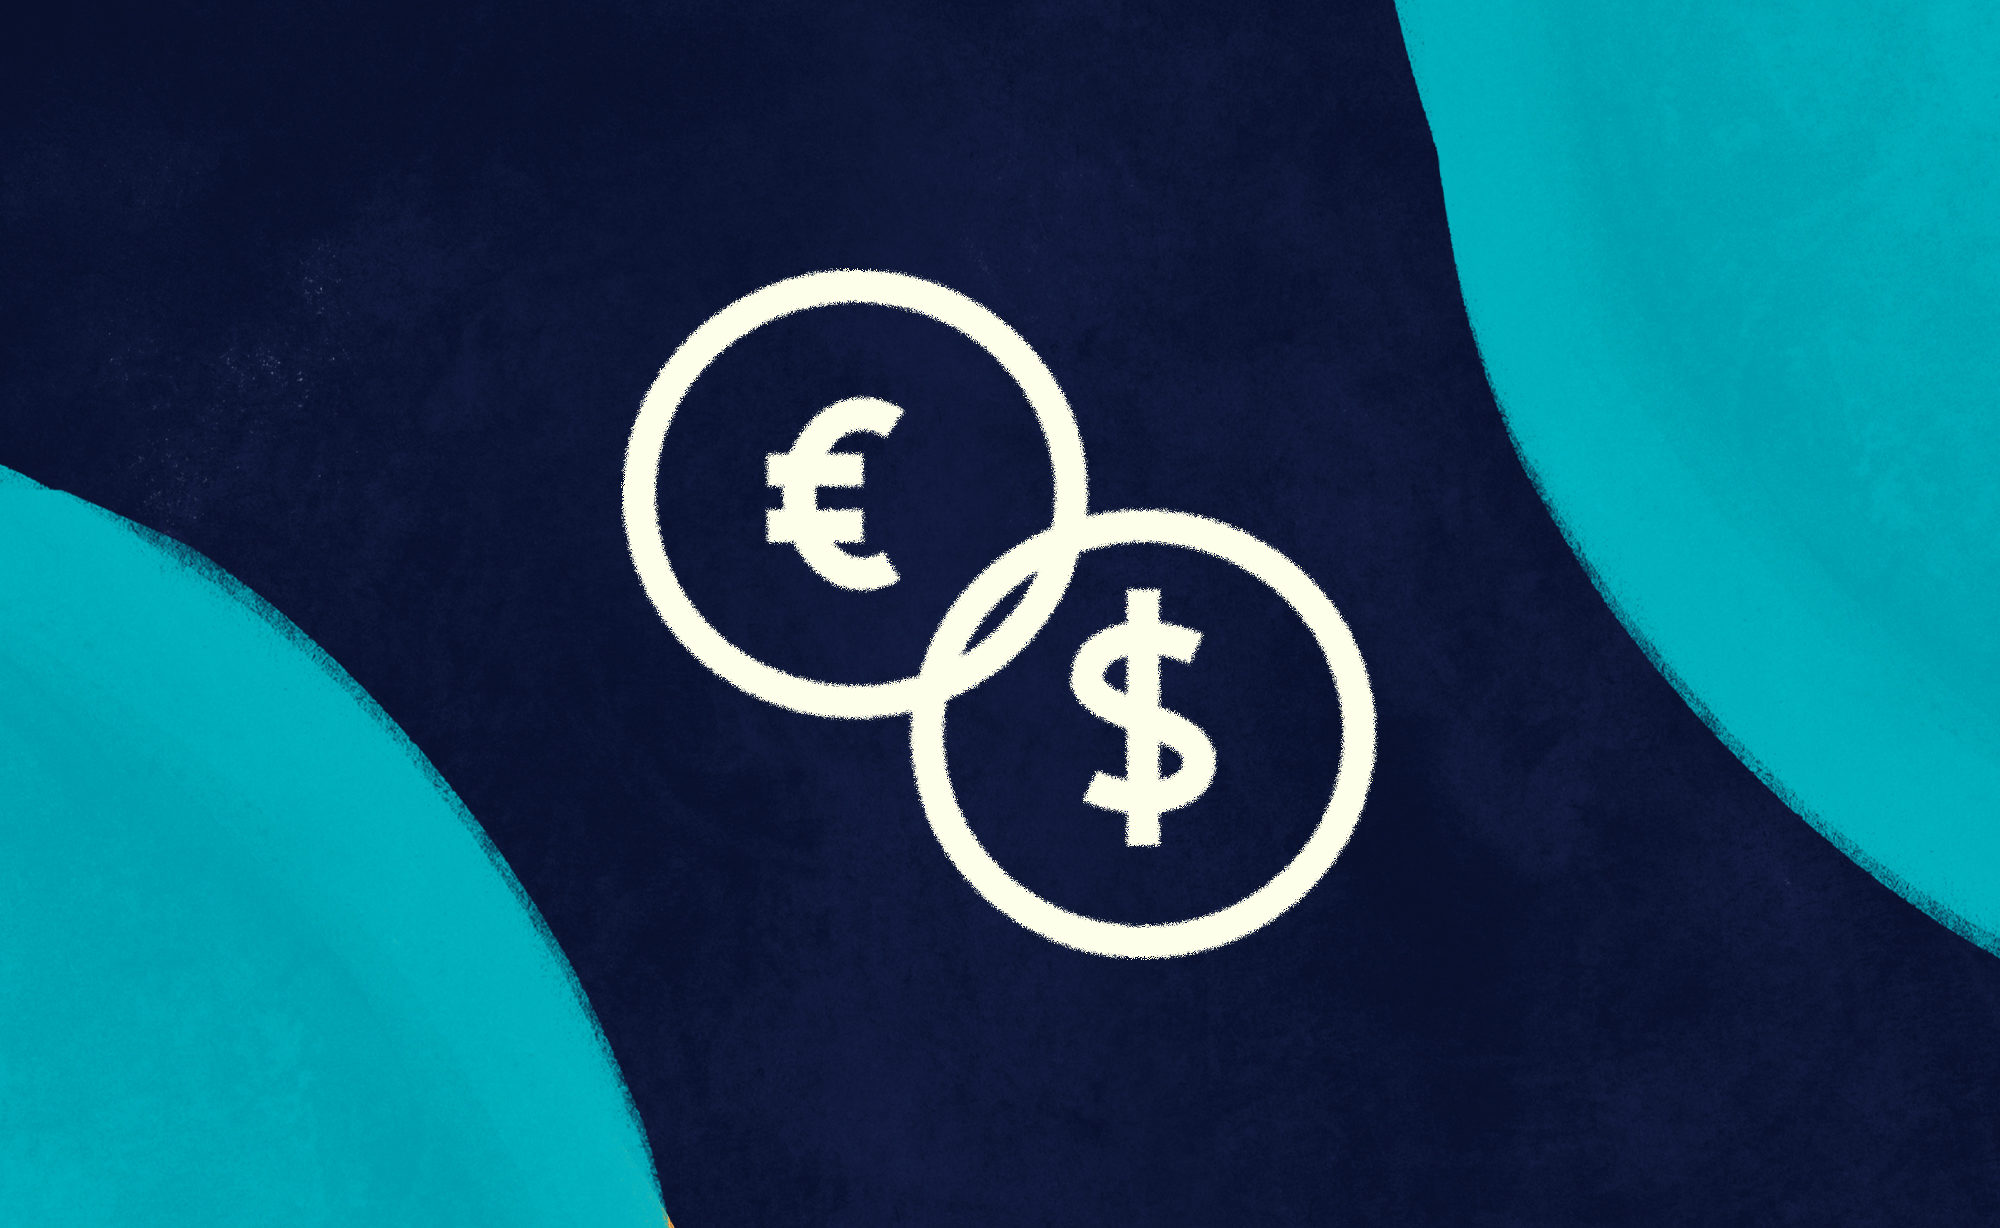 Multiple currency icon overlaid on a textured dark blue and turquoise background